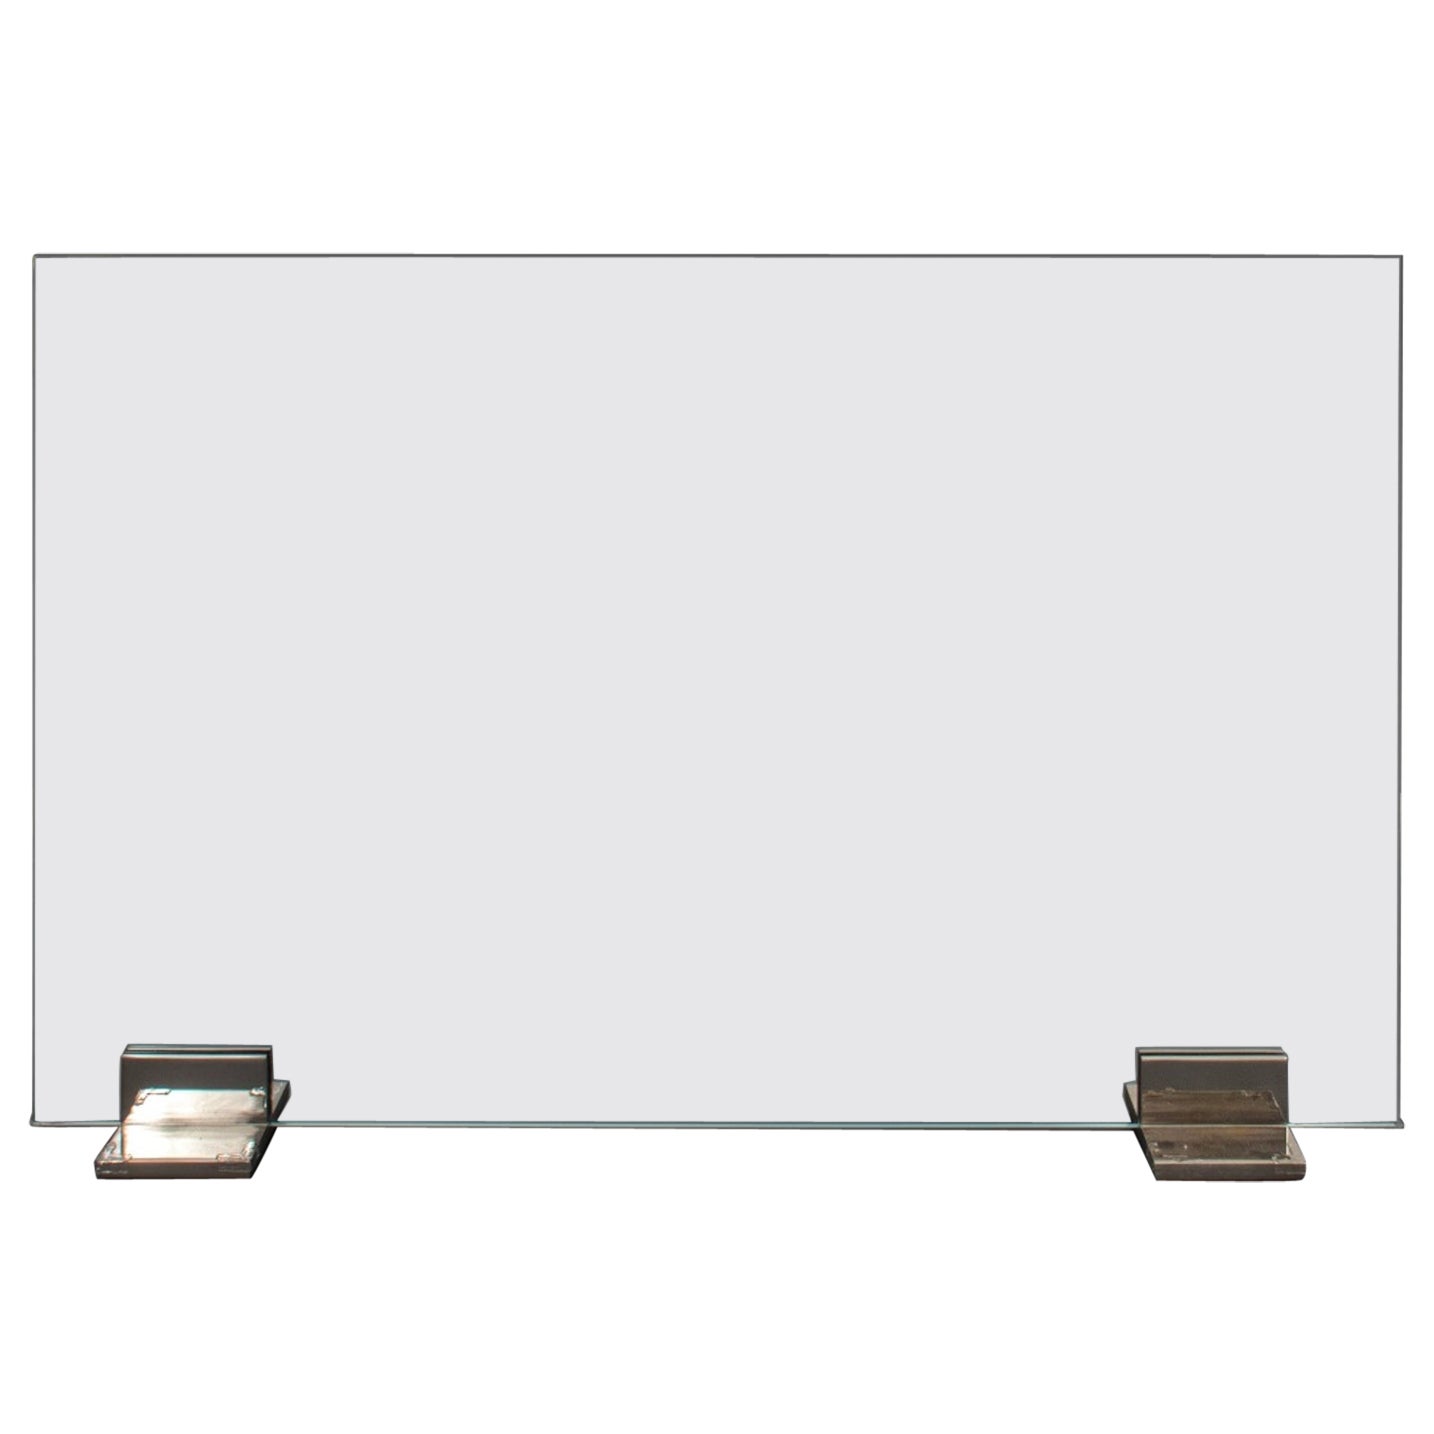 Stone Manufacturing Co. Modern Glass Fire Screen For Sale